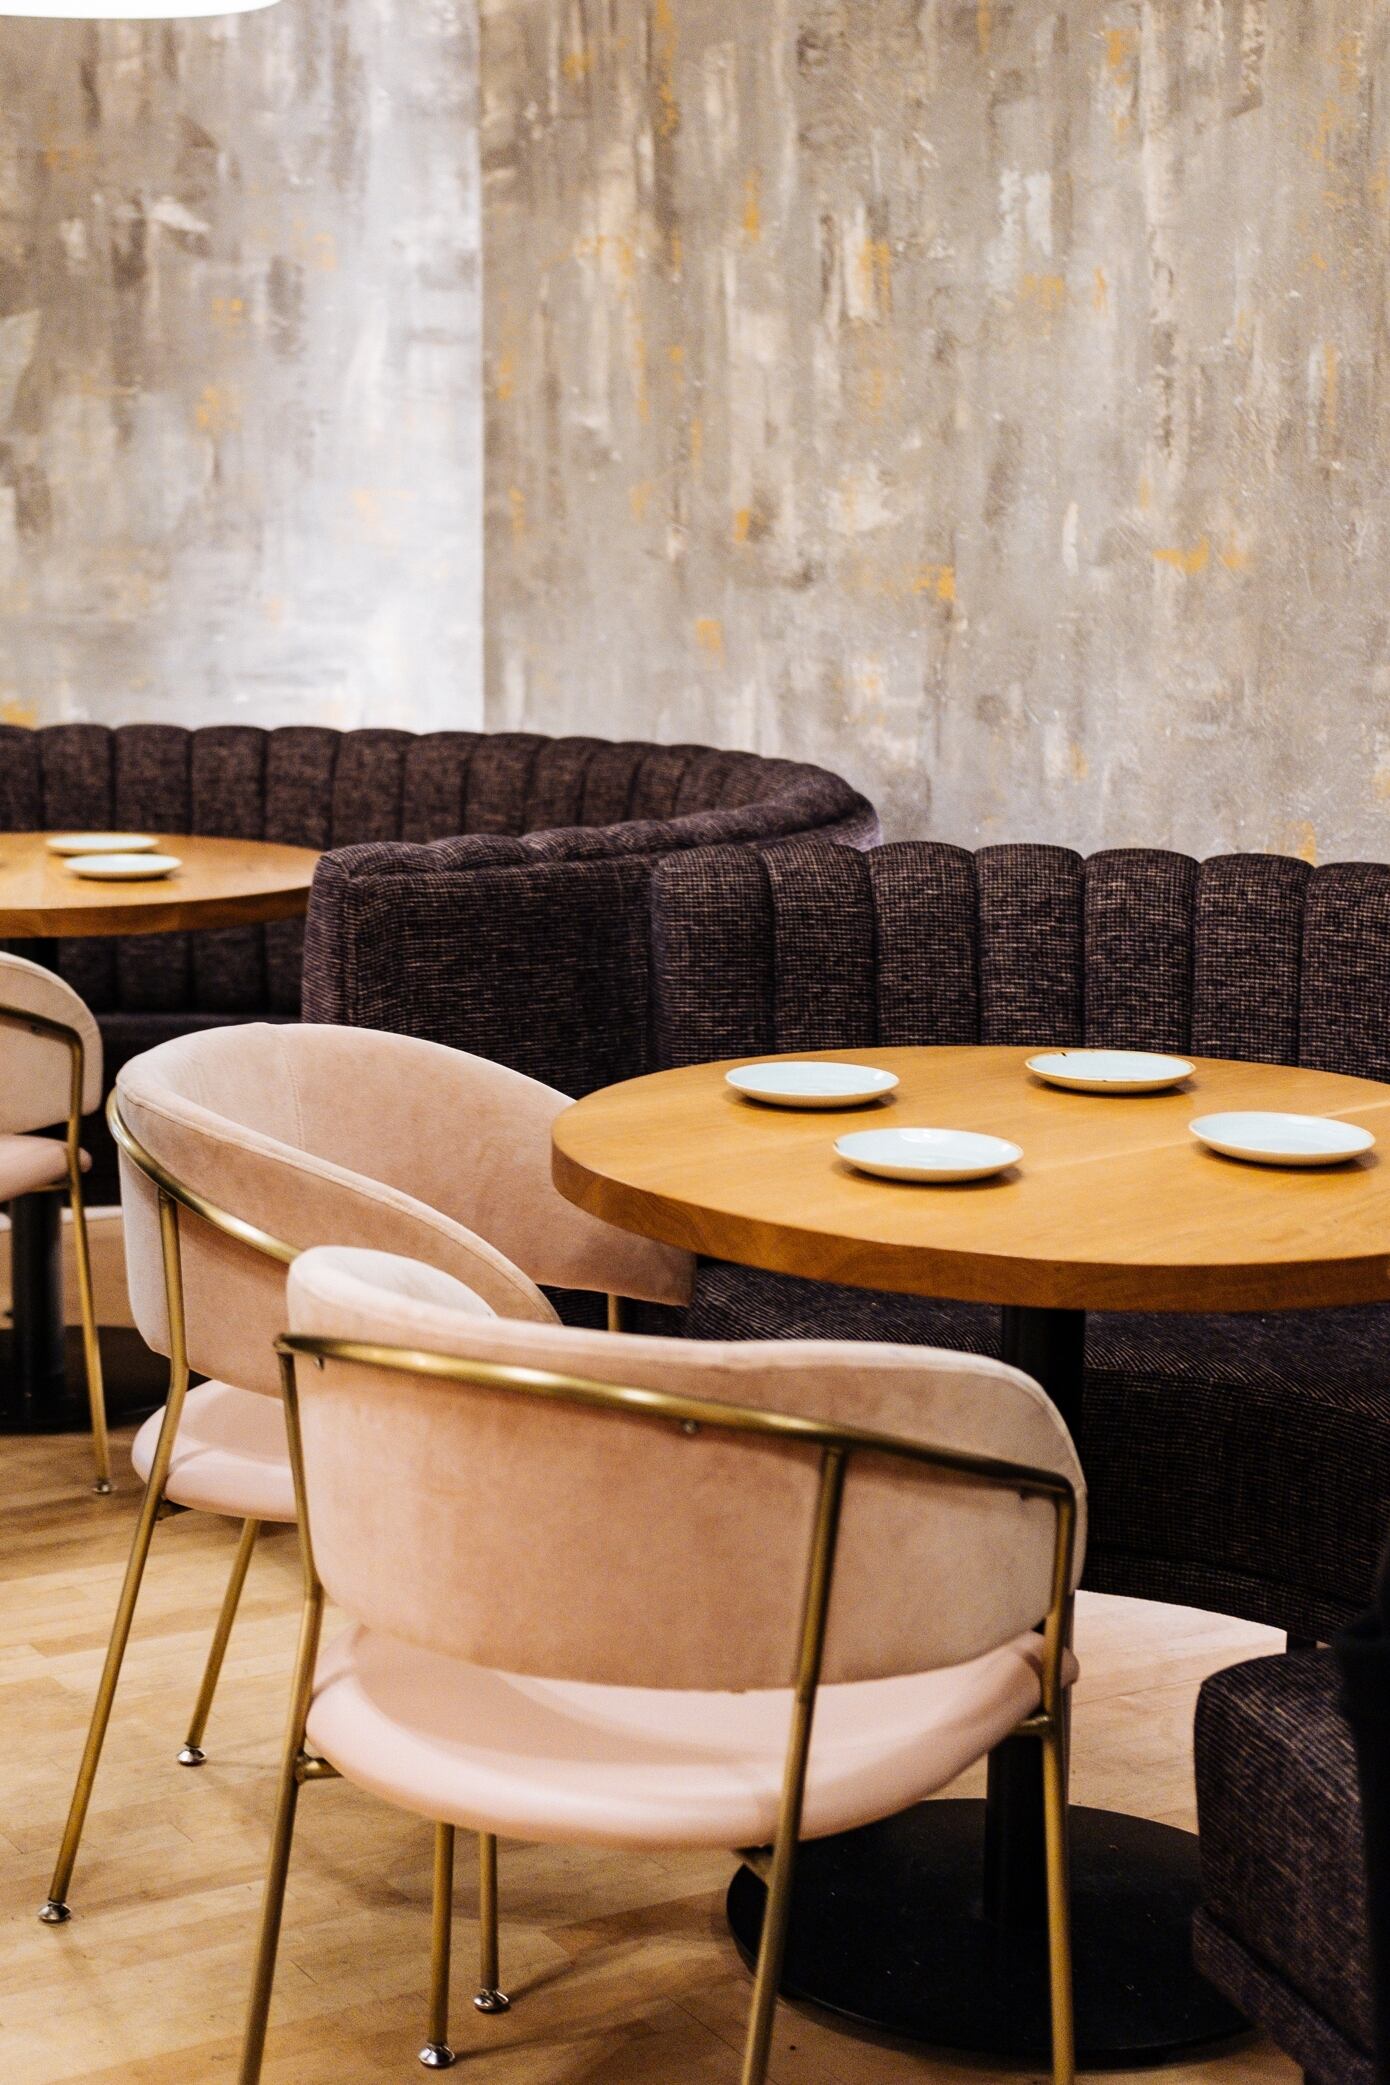 How To Choose The Right Restaurant Booths For Your Space